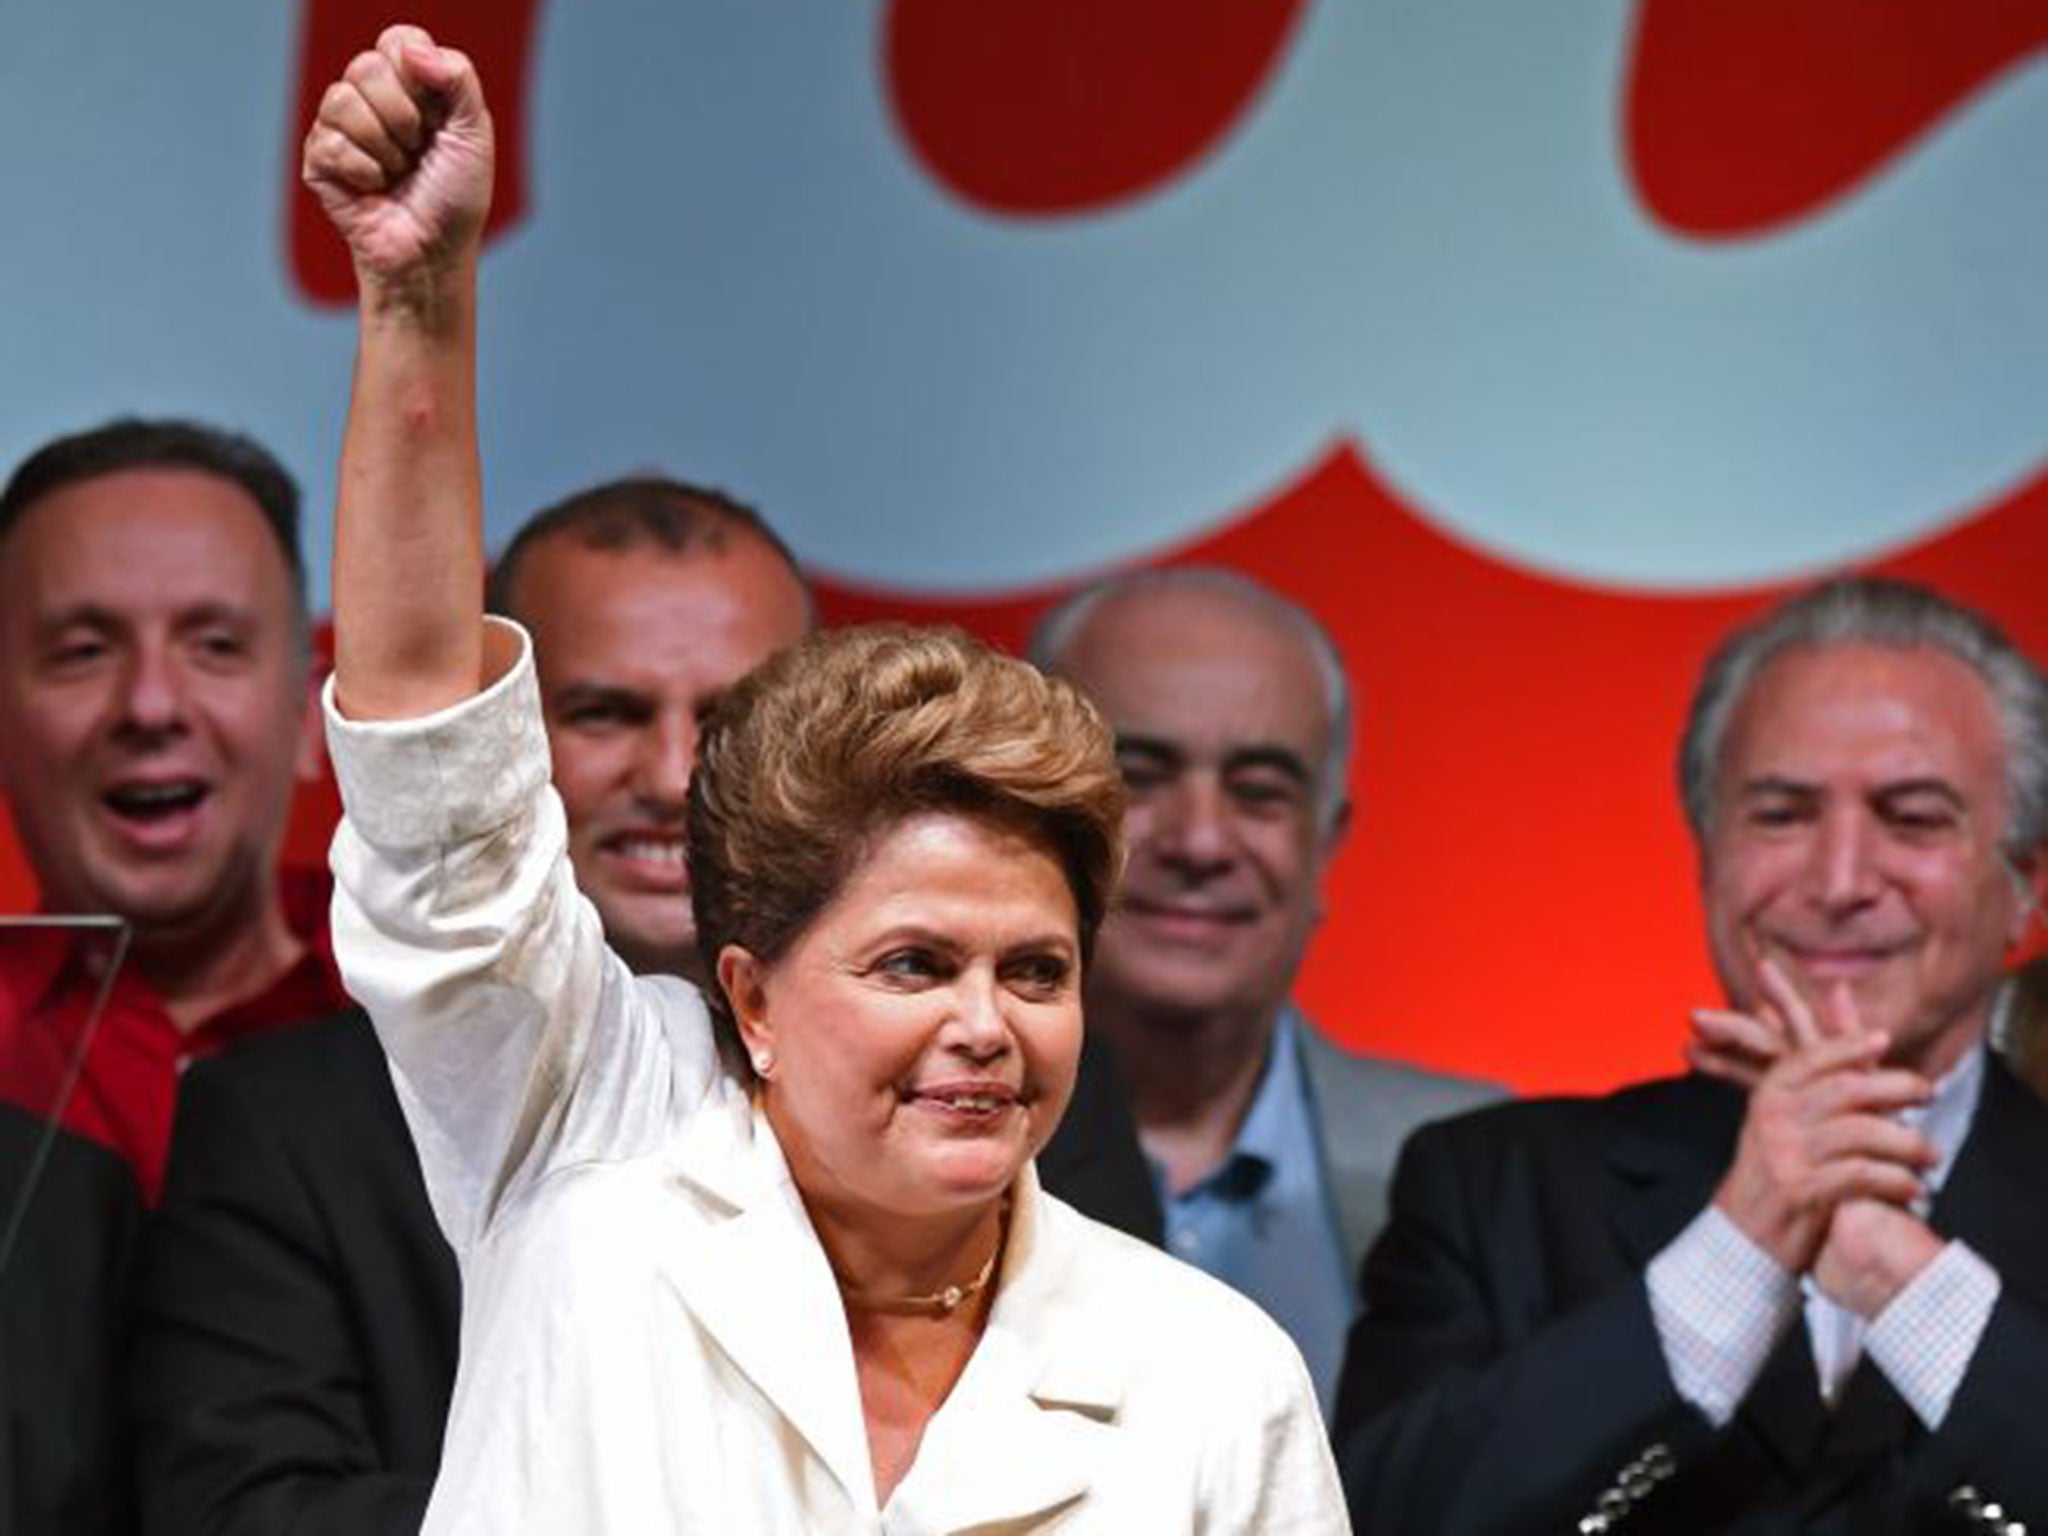 Dilma Rousseff and her party are embroiled in a continuing investigation into the $800m (£538m) in bribes allegedly paid by companies bidding for Petrobras contracts